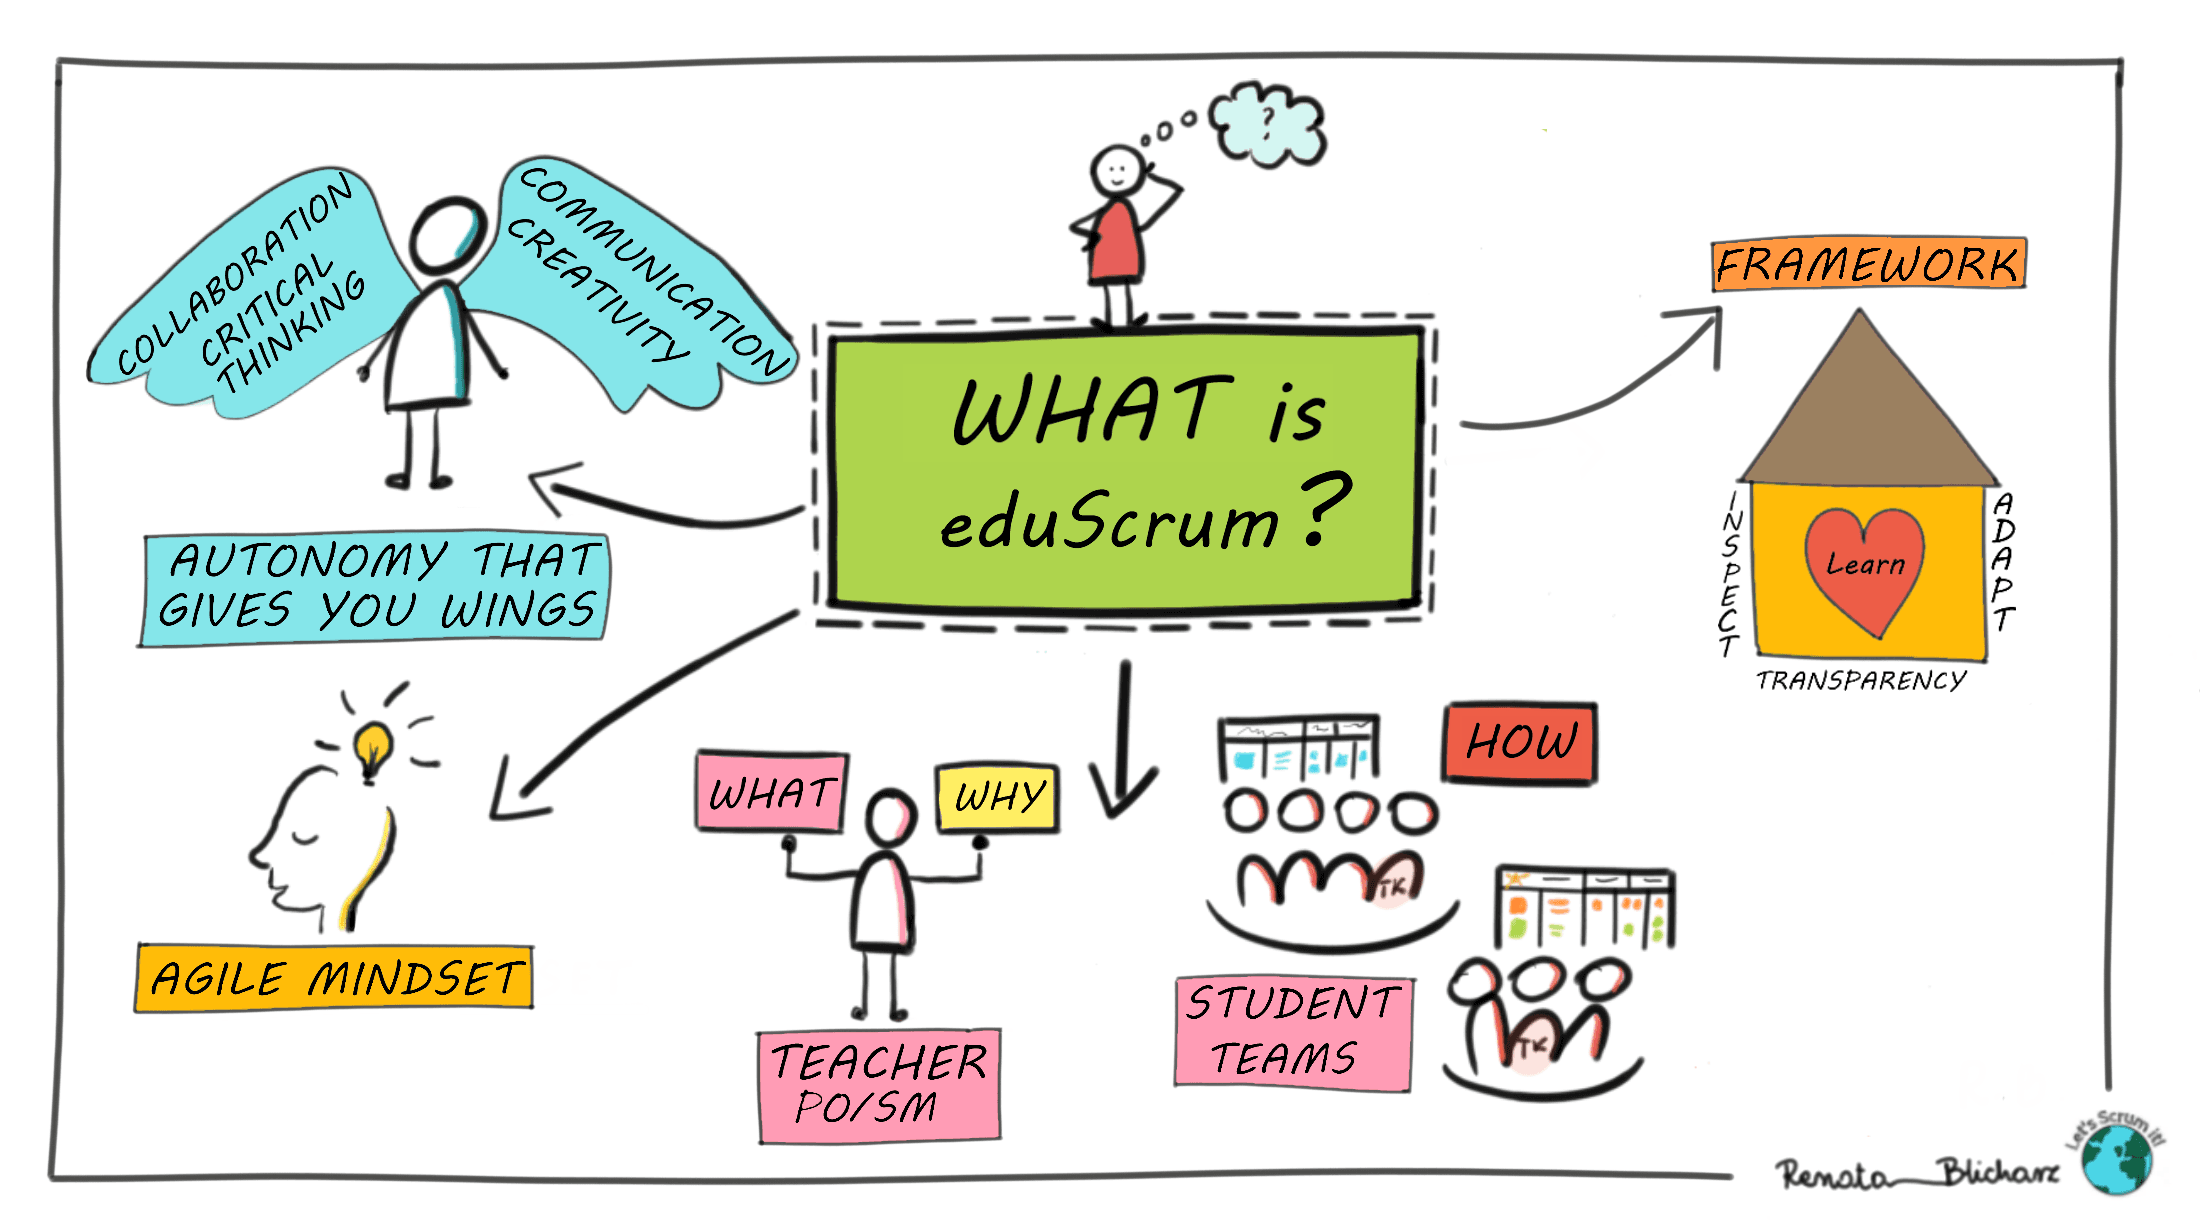 What is eduScrum?